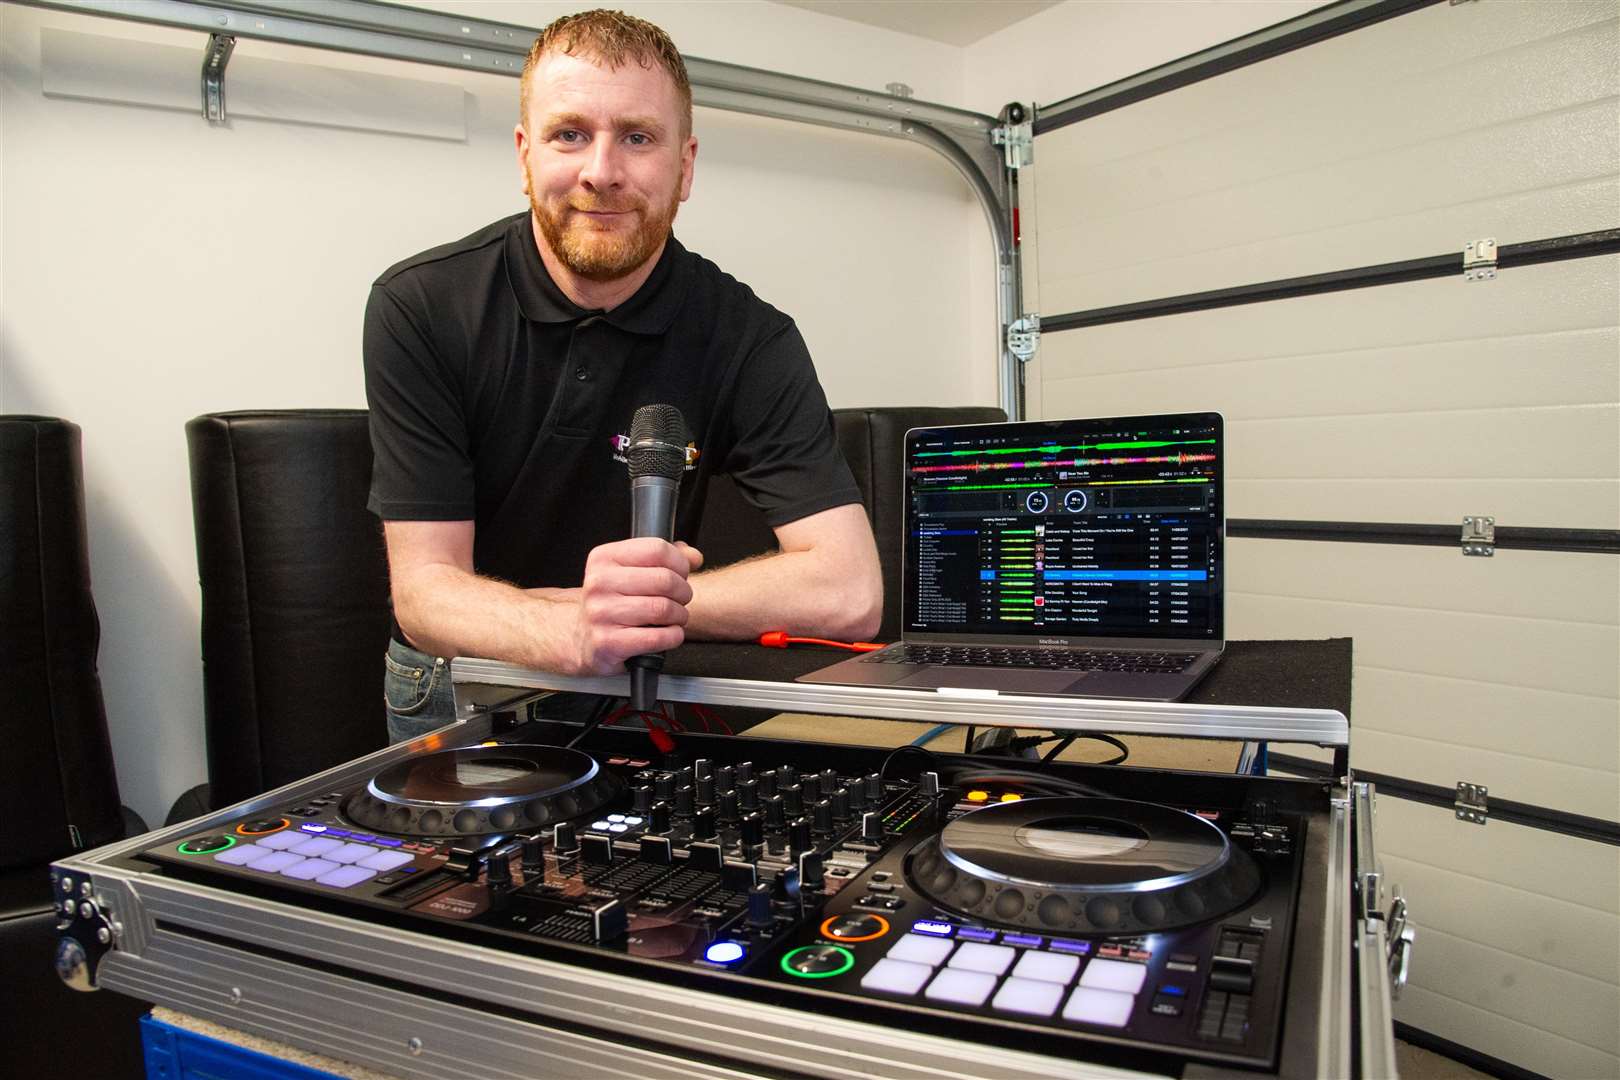 Buckie disc jockey Paul Tough has been shortlisted for a national award recognising wedding DJs. Picture: Daniel Forsyth